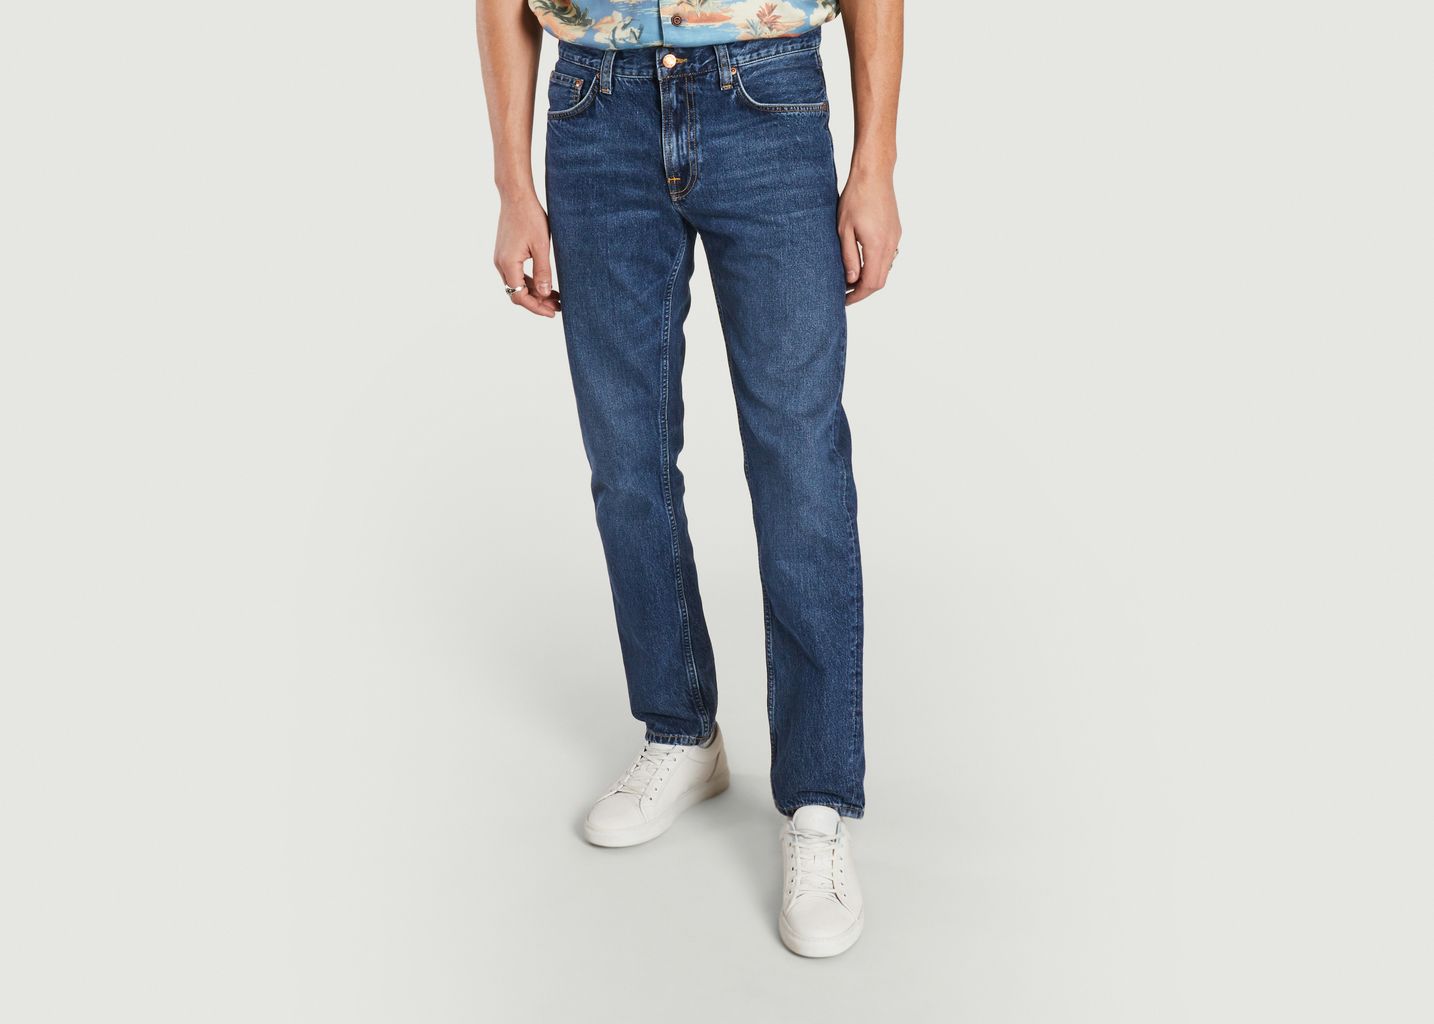 Gritty Jackson Reguläre Jeans - Nudie Jeans